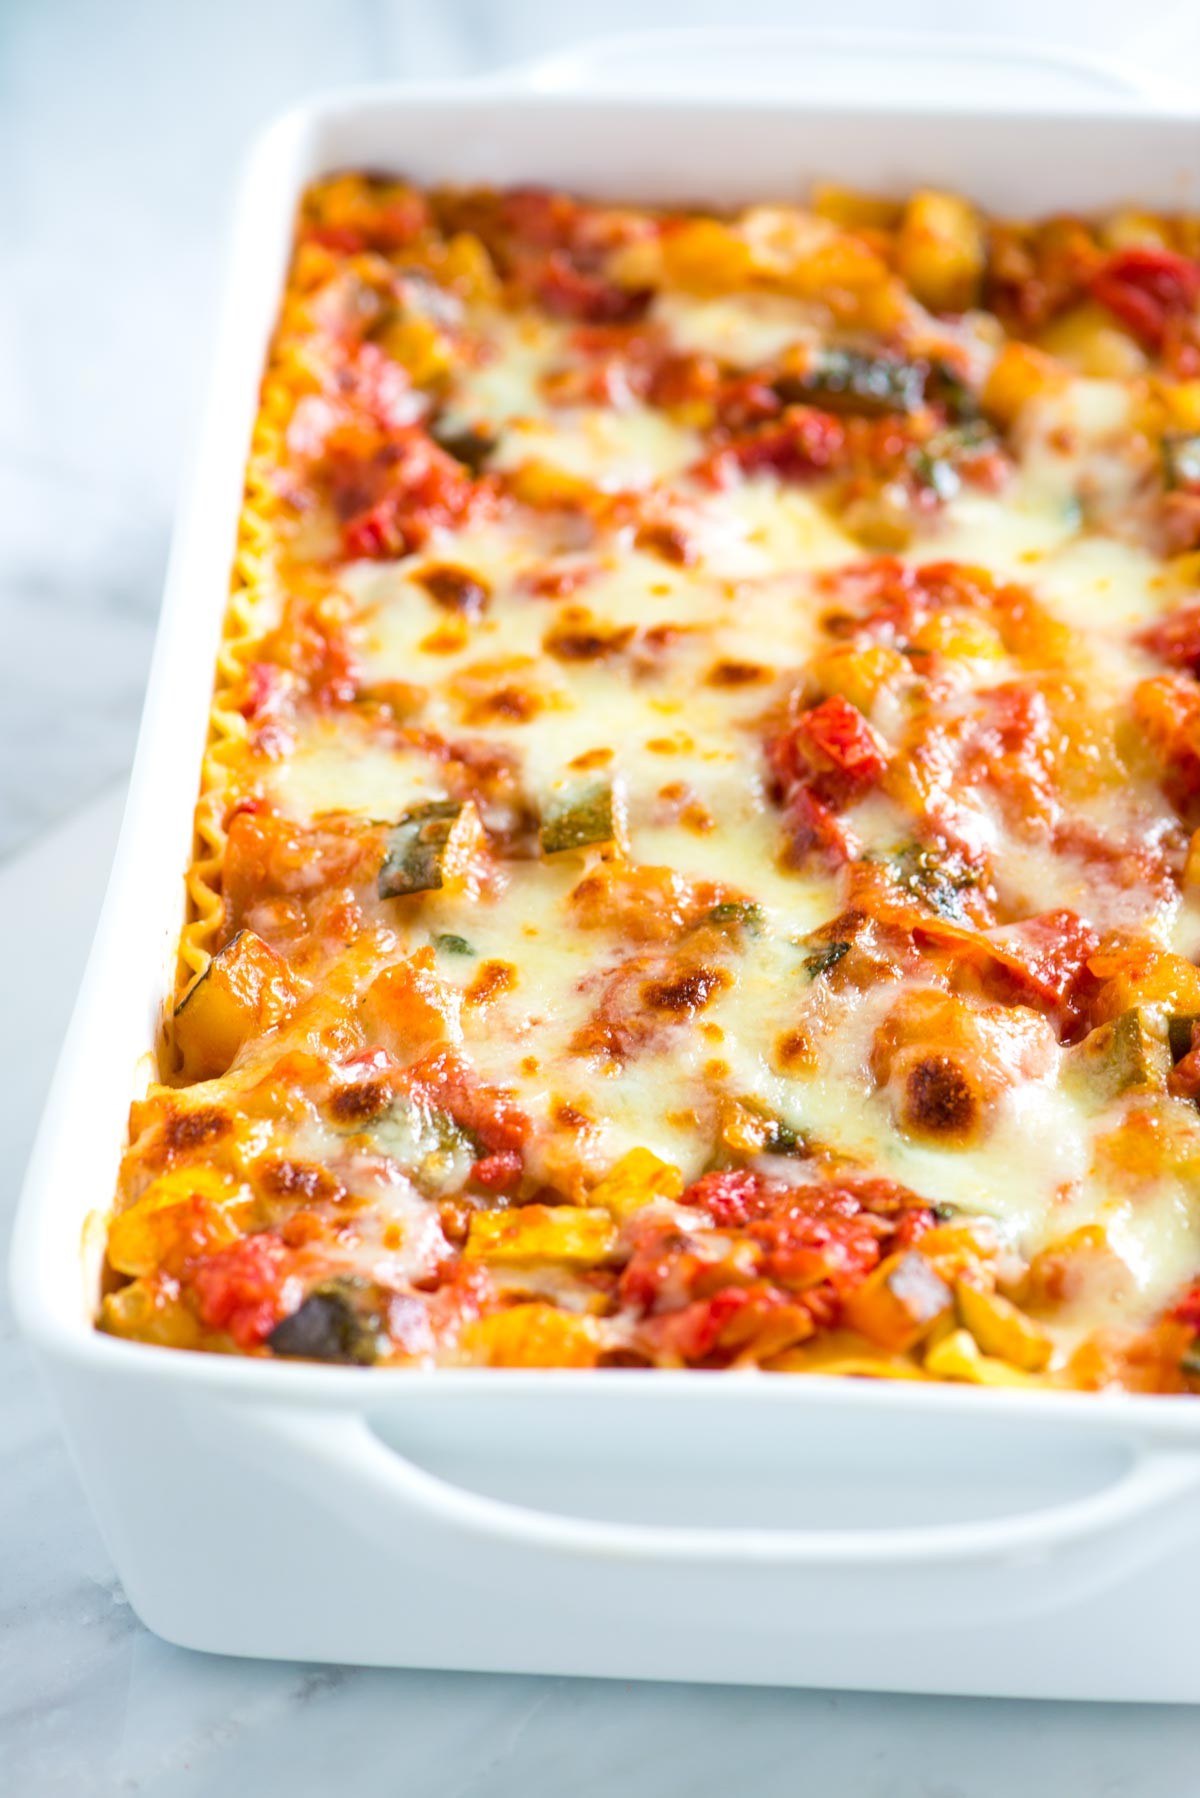 Easy Vegetable Lasagna | Kirsty Burnell | Copy Me That